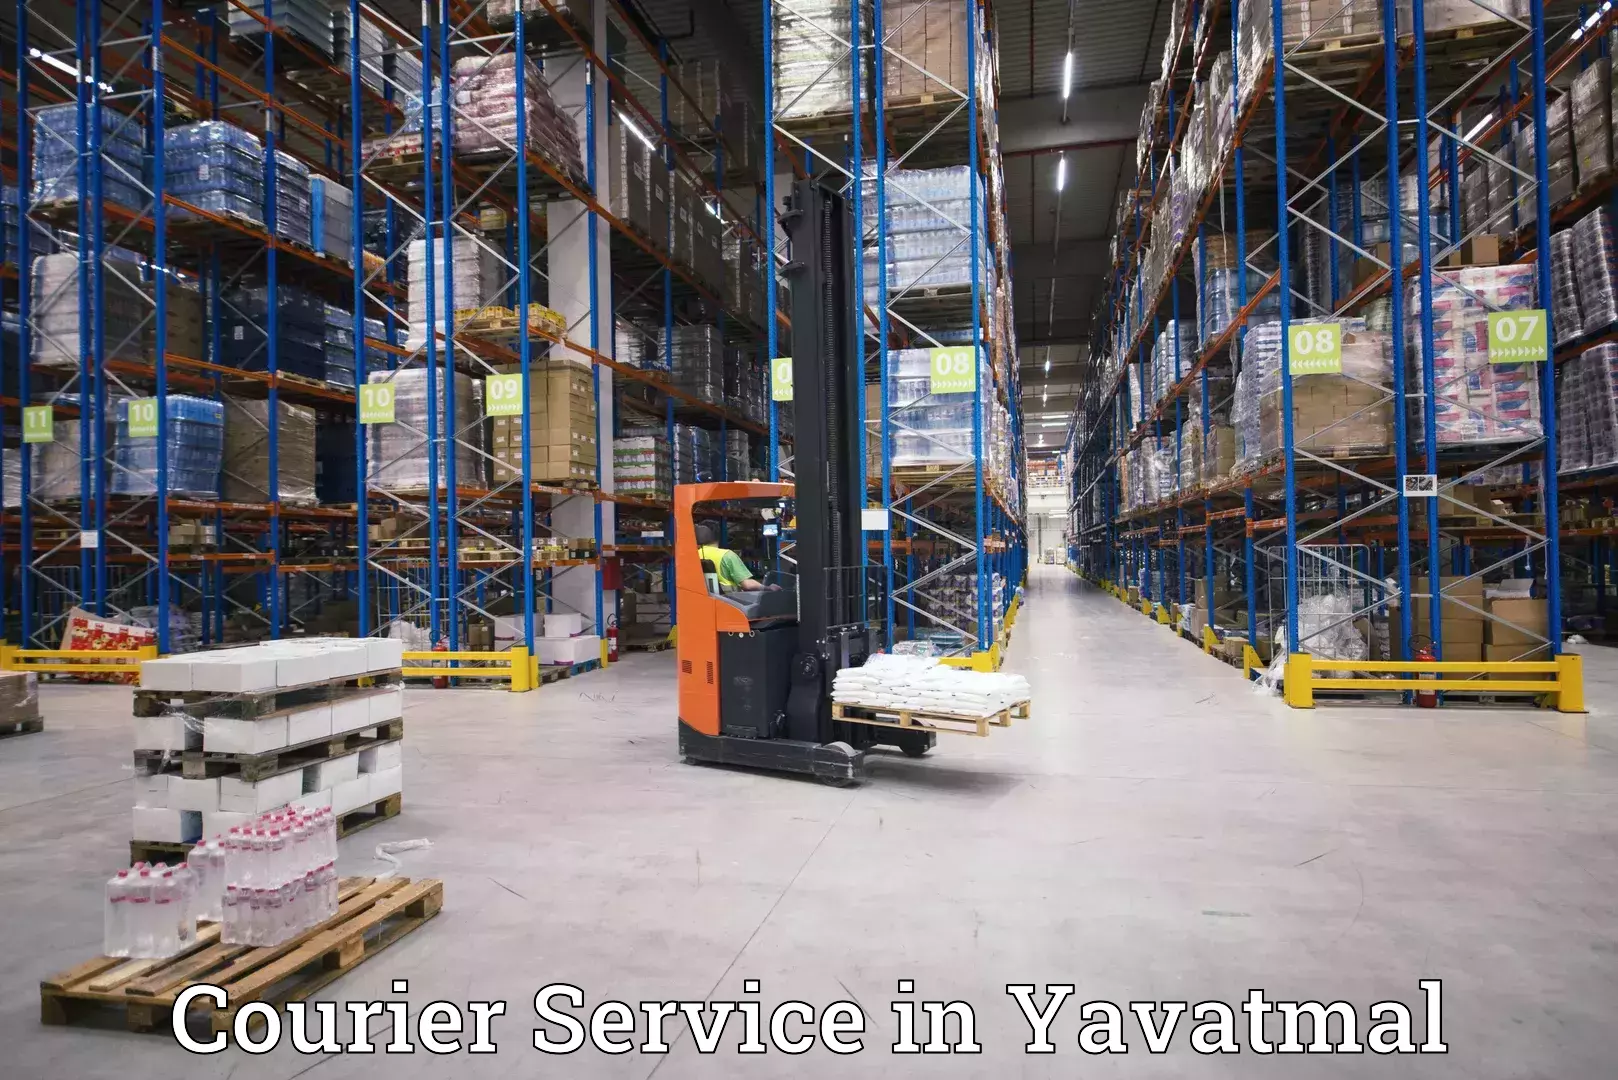 Rapid shipping services in Yavatmal